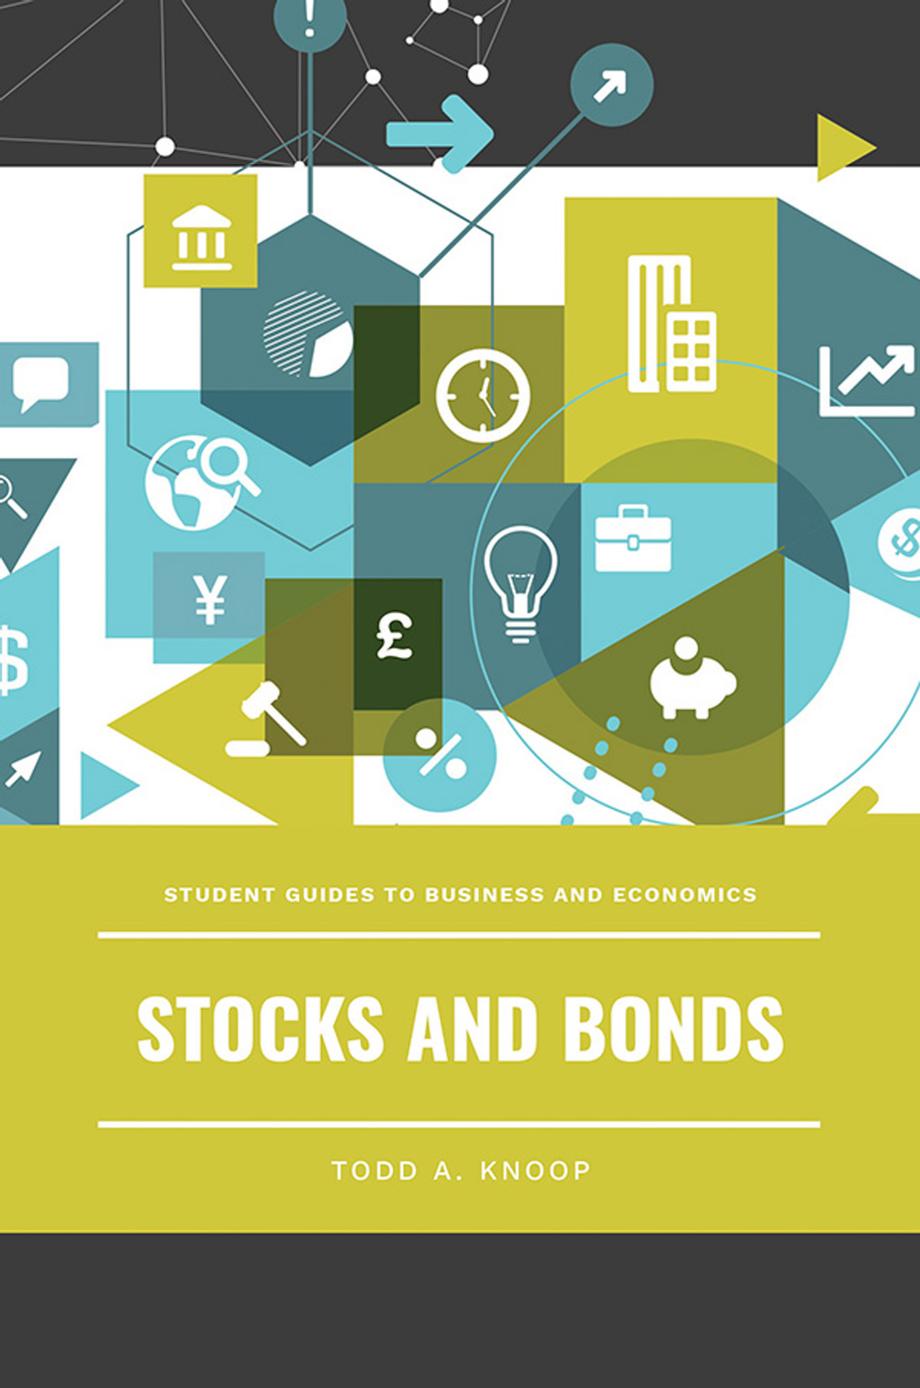 Stocks and Bonds by Todd A. Knoop